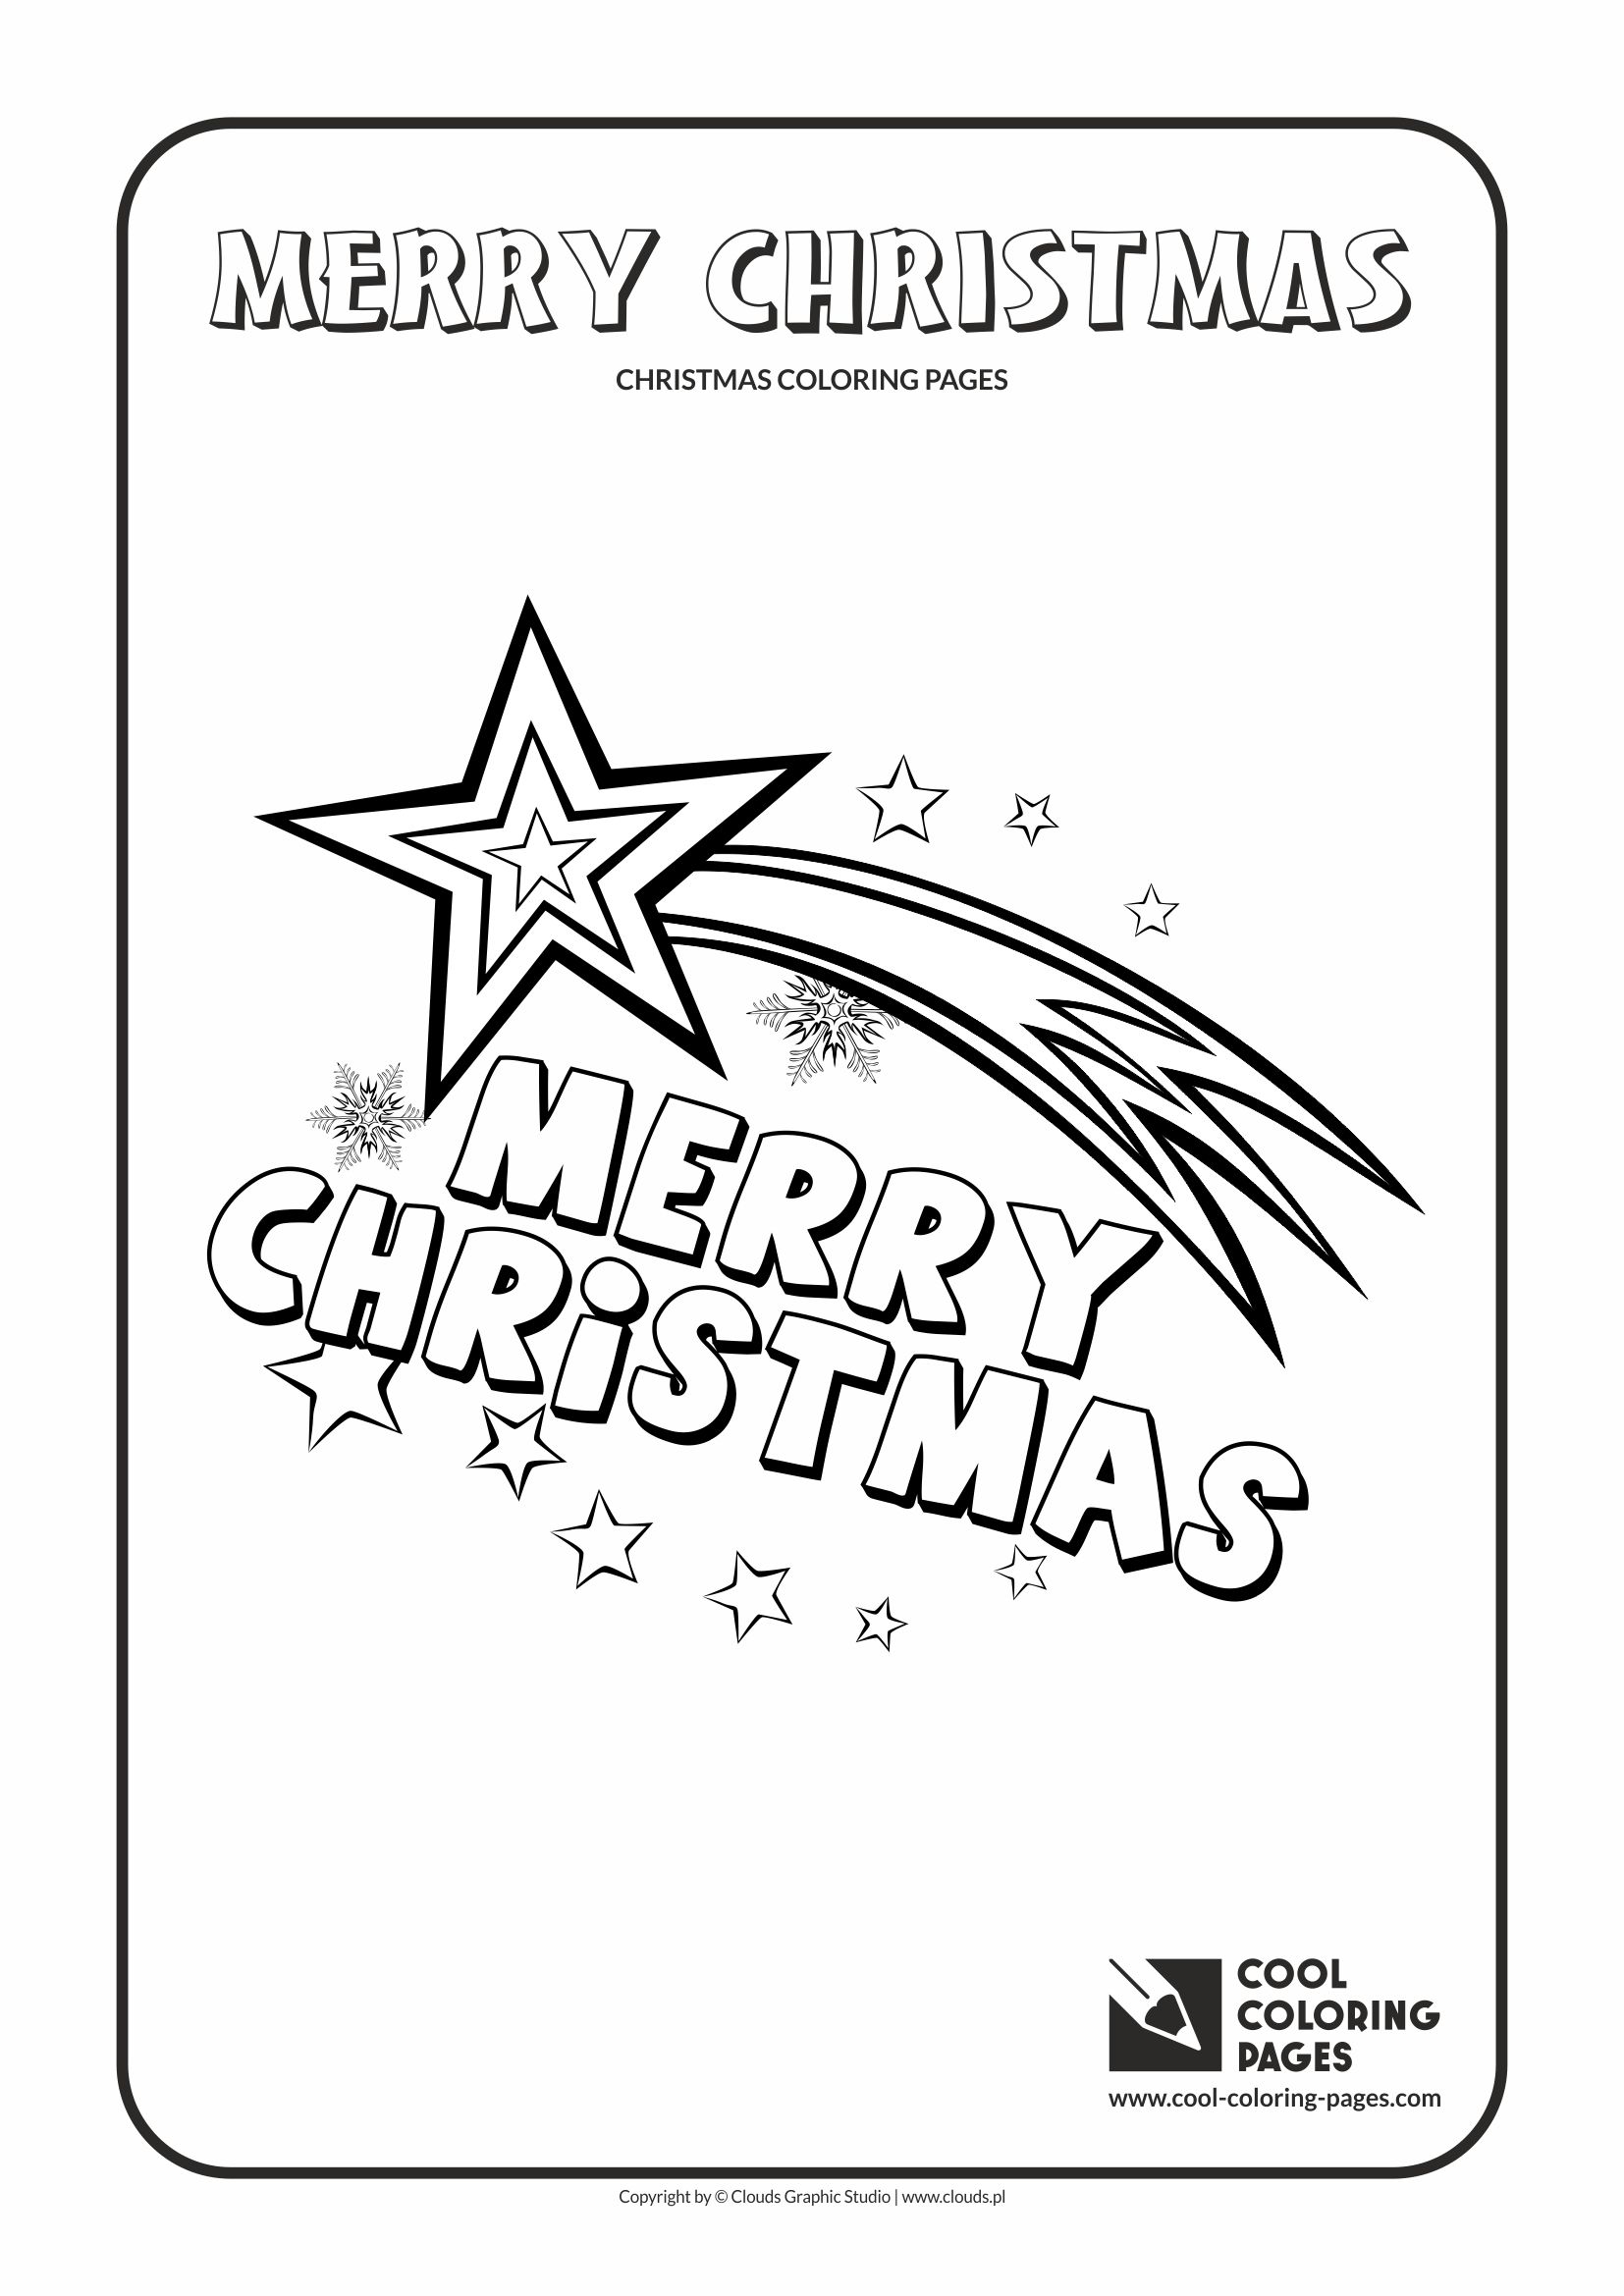 Cool Coloring Pages - Holidays / Christmas star / Coloring page with Christmas star